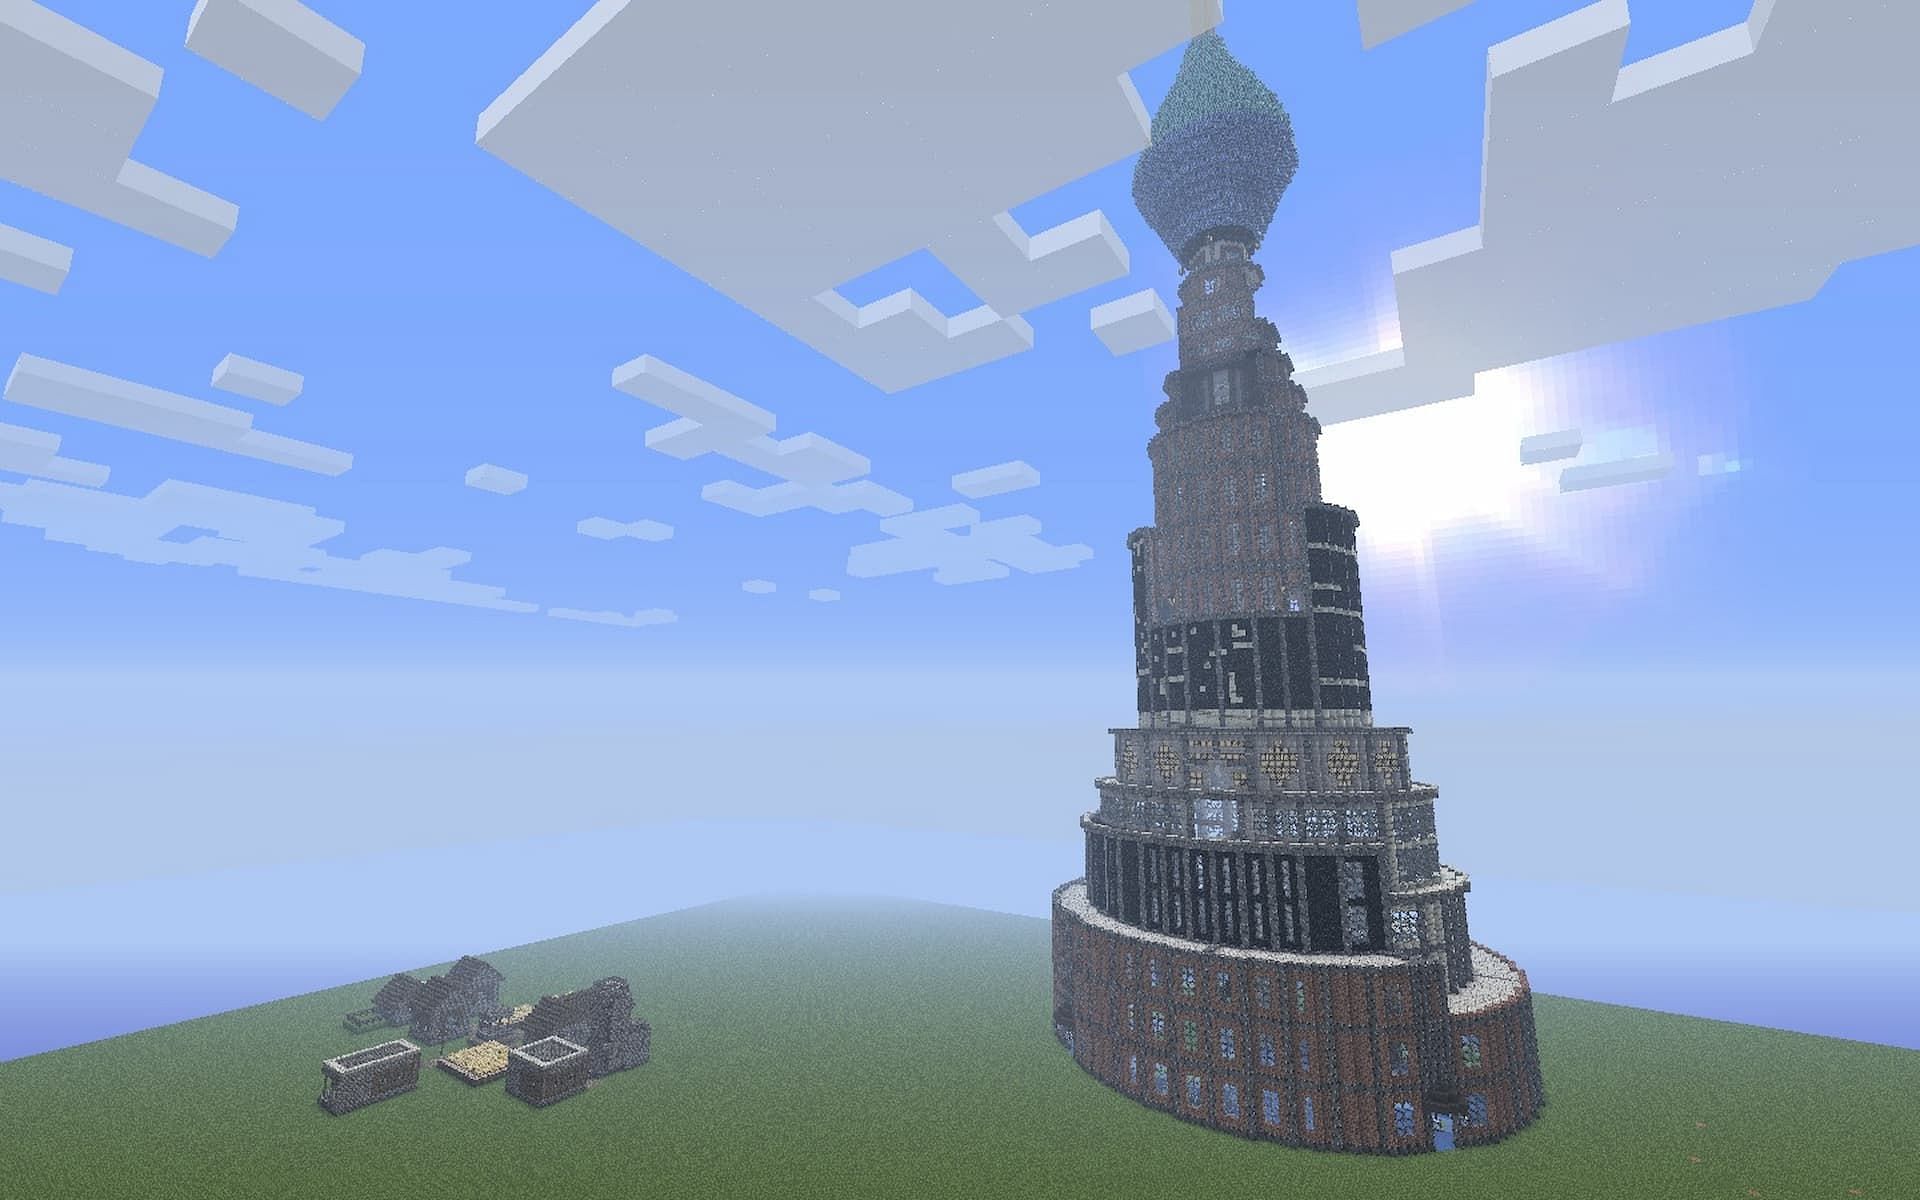 Players can only build to the maximum height limit (Image via Minecraftforum.net)